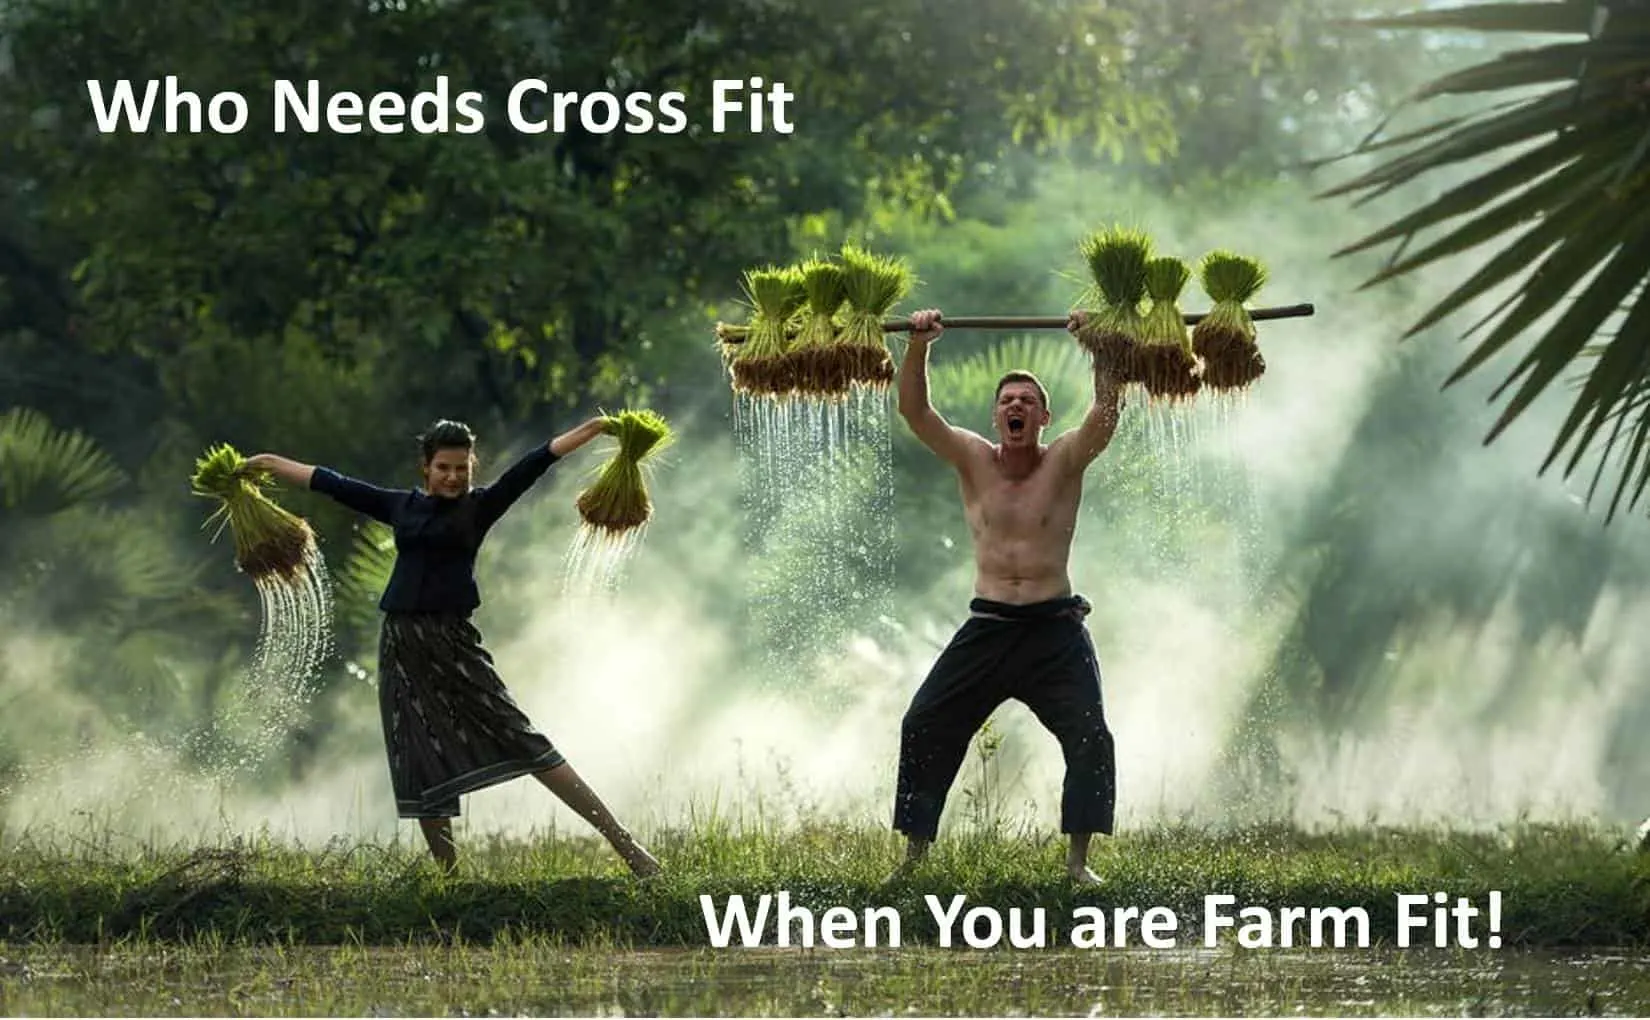 Who needs cross fit when you are farm fit!